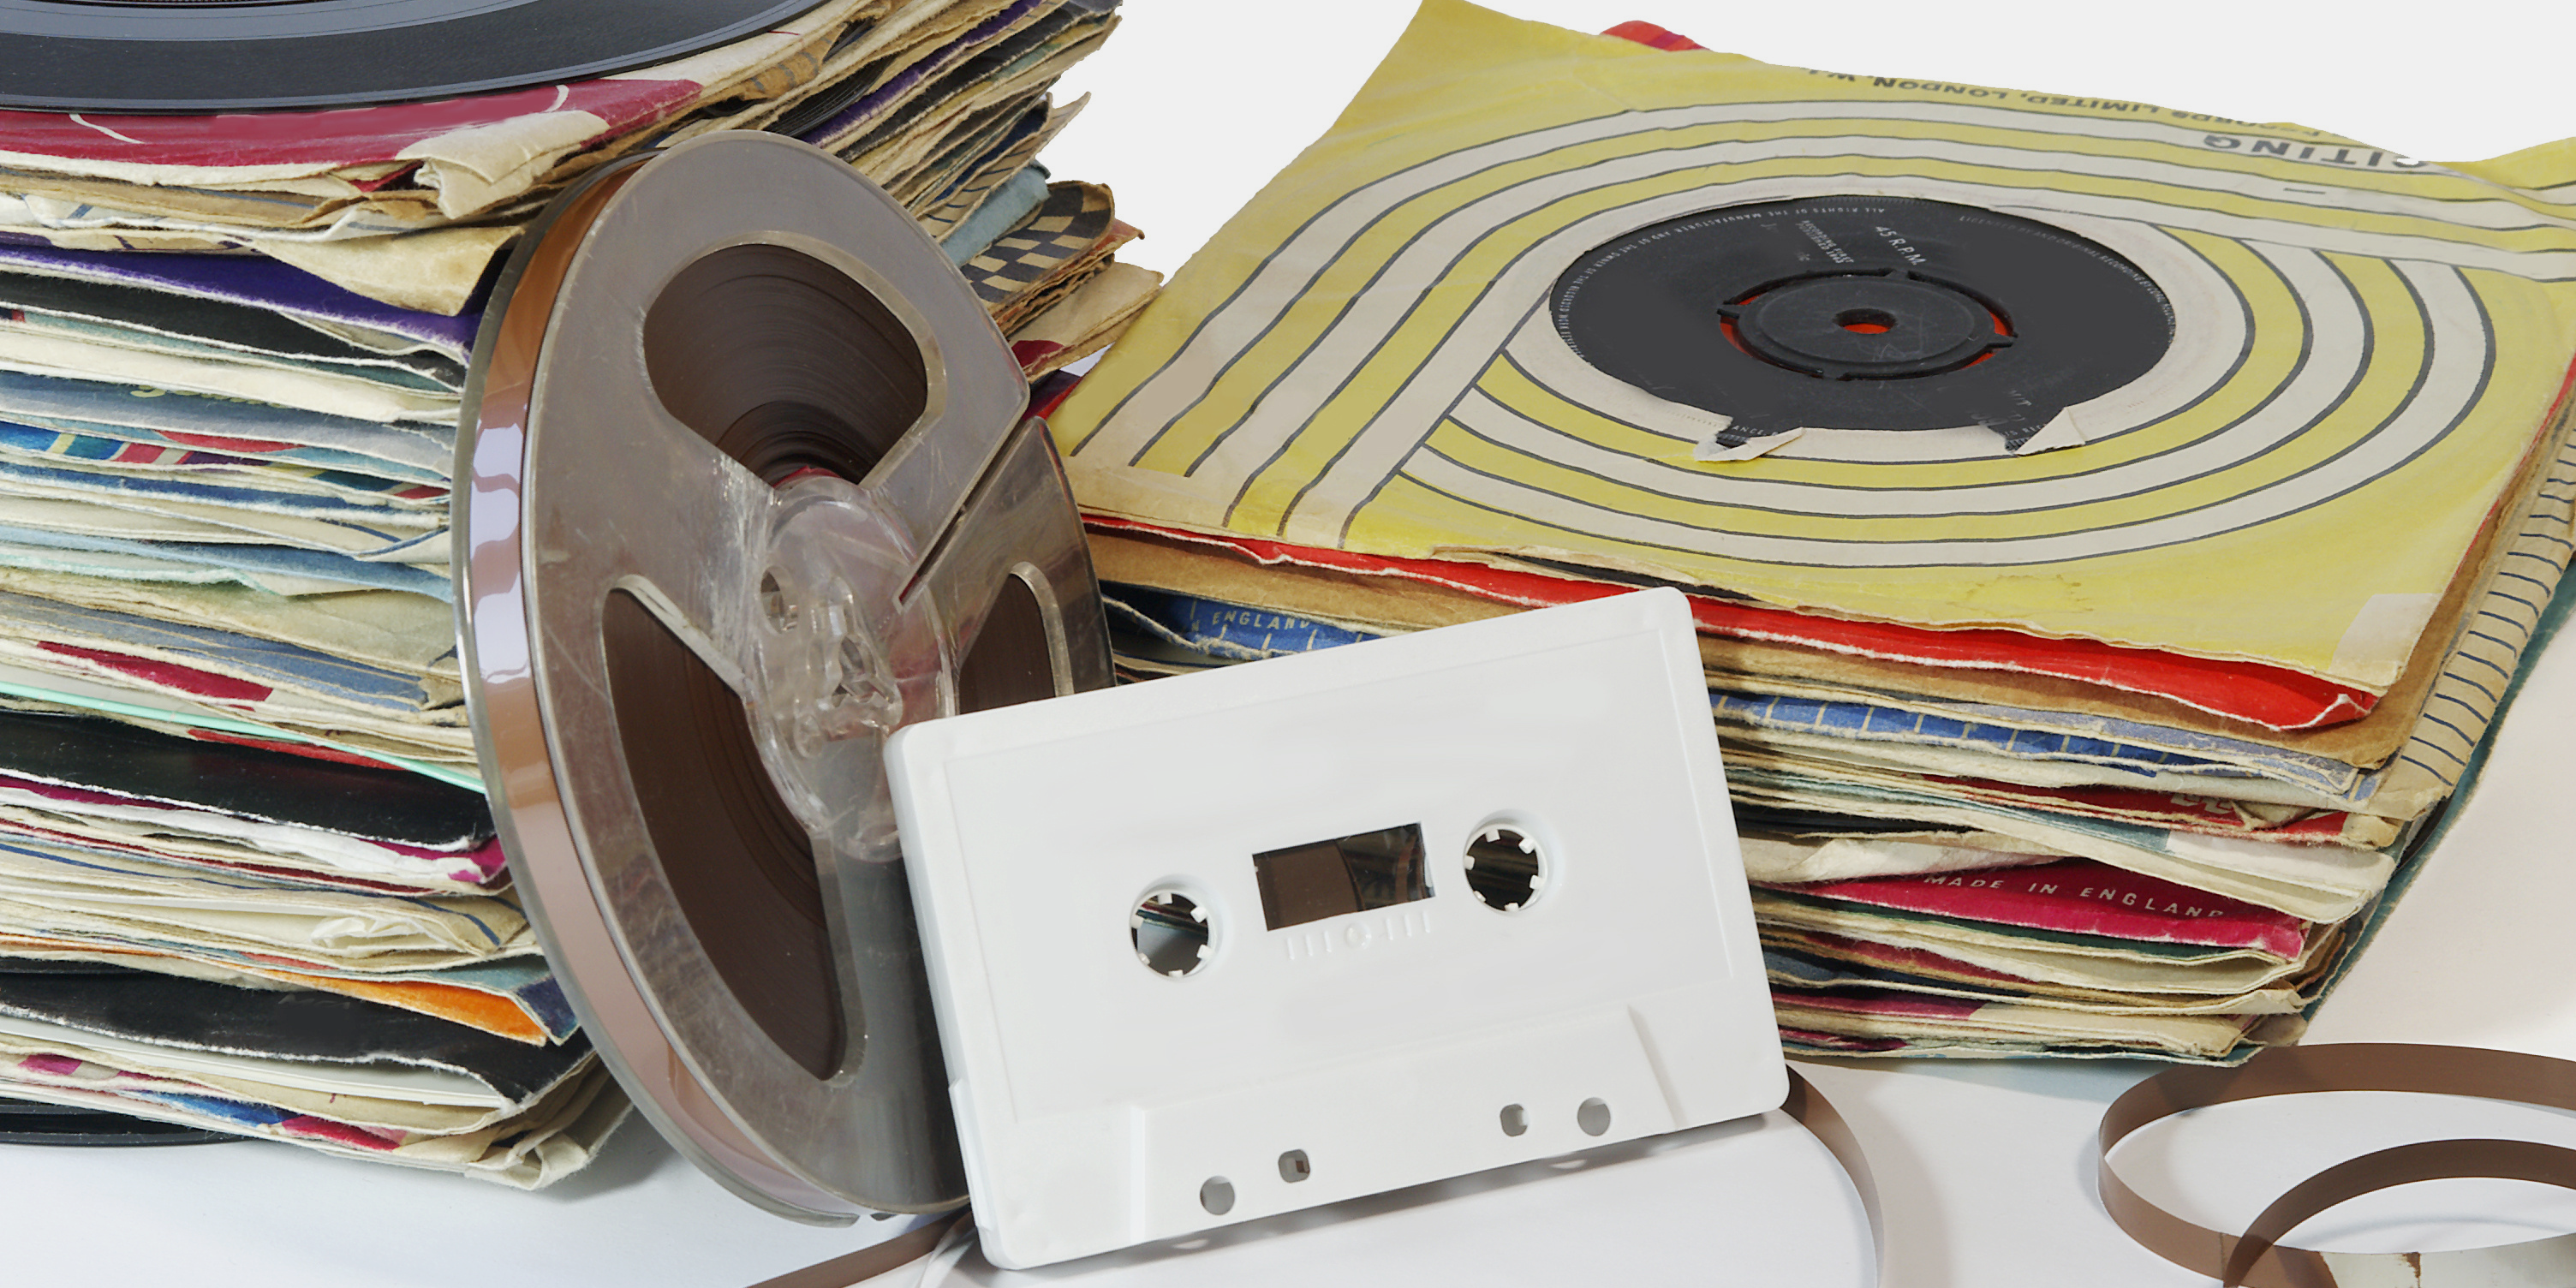 Transfer audio tapes, cassettes and vinyl records to Compact Disc (CD) and digital files at Milwaukee Media Duplication.